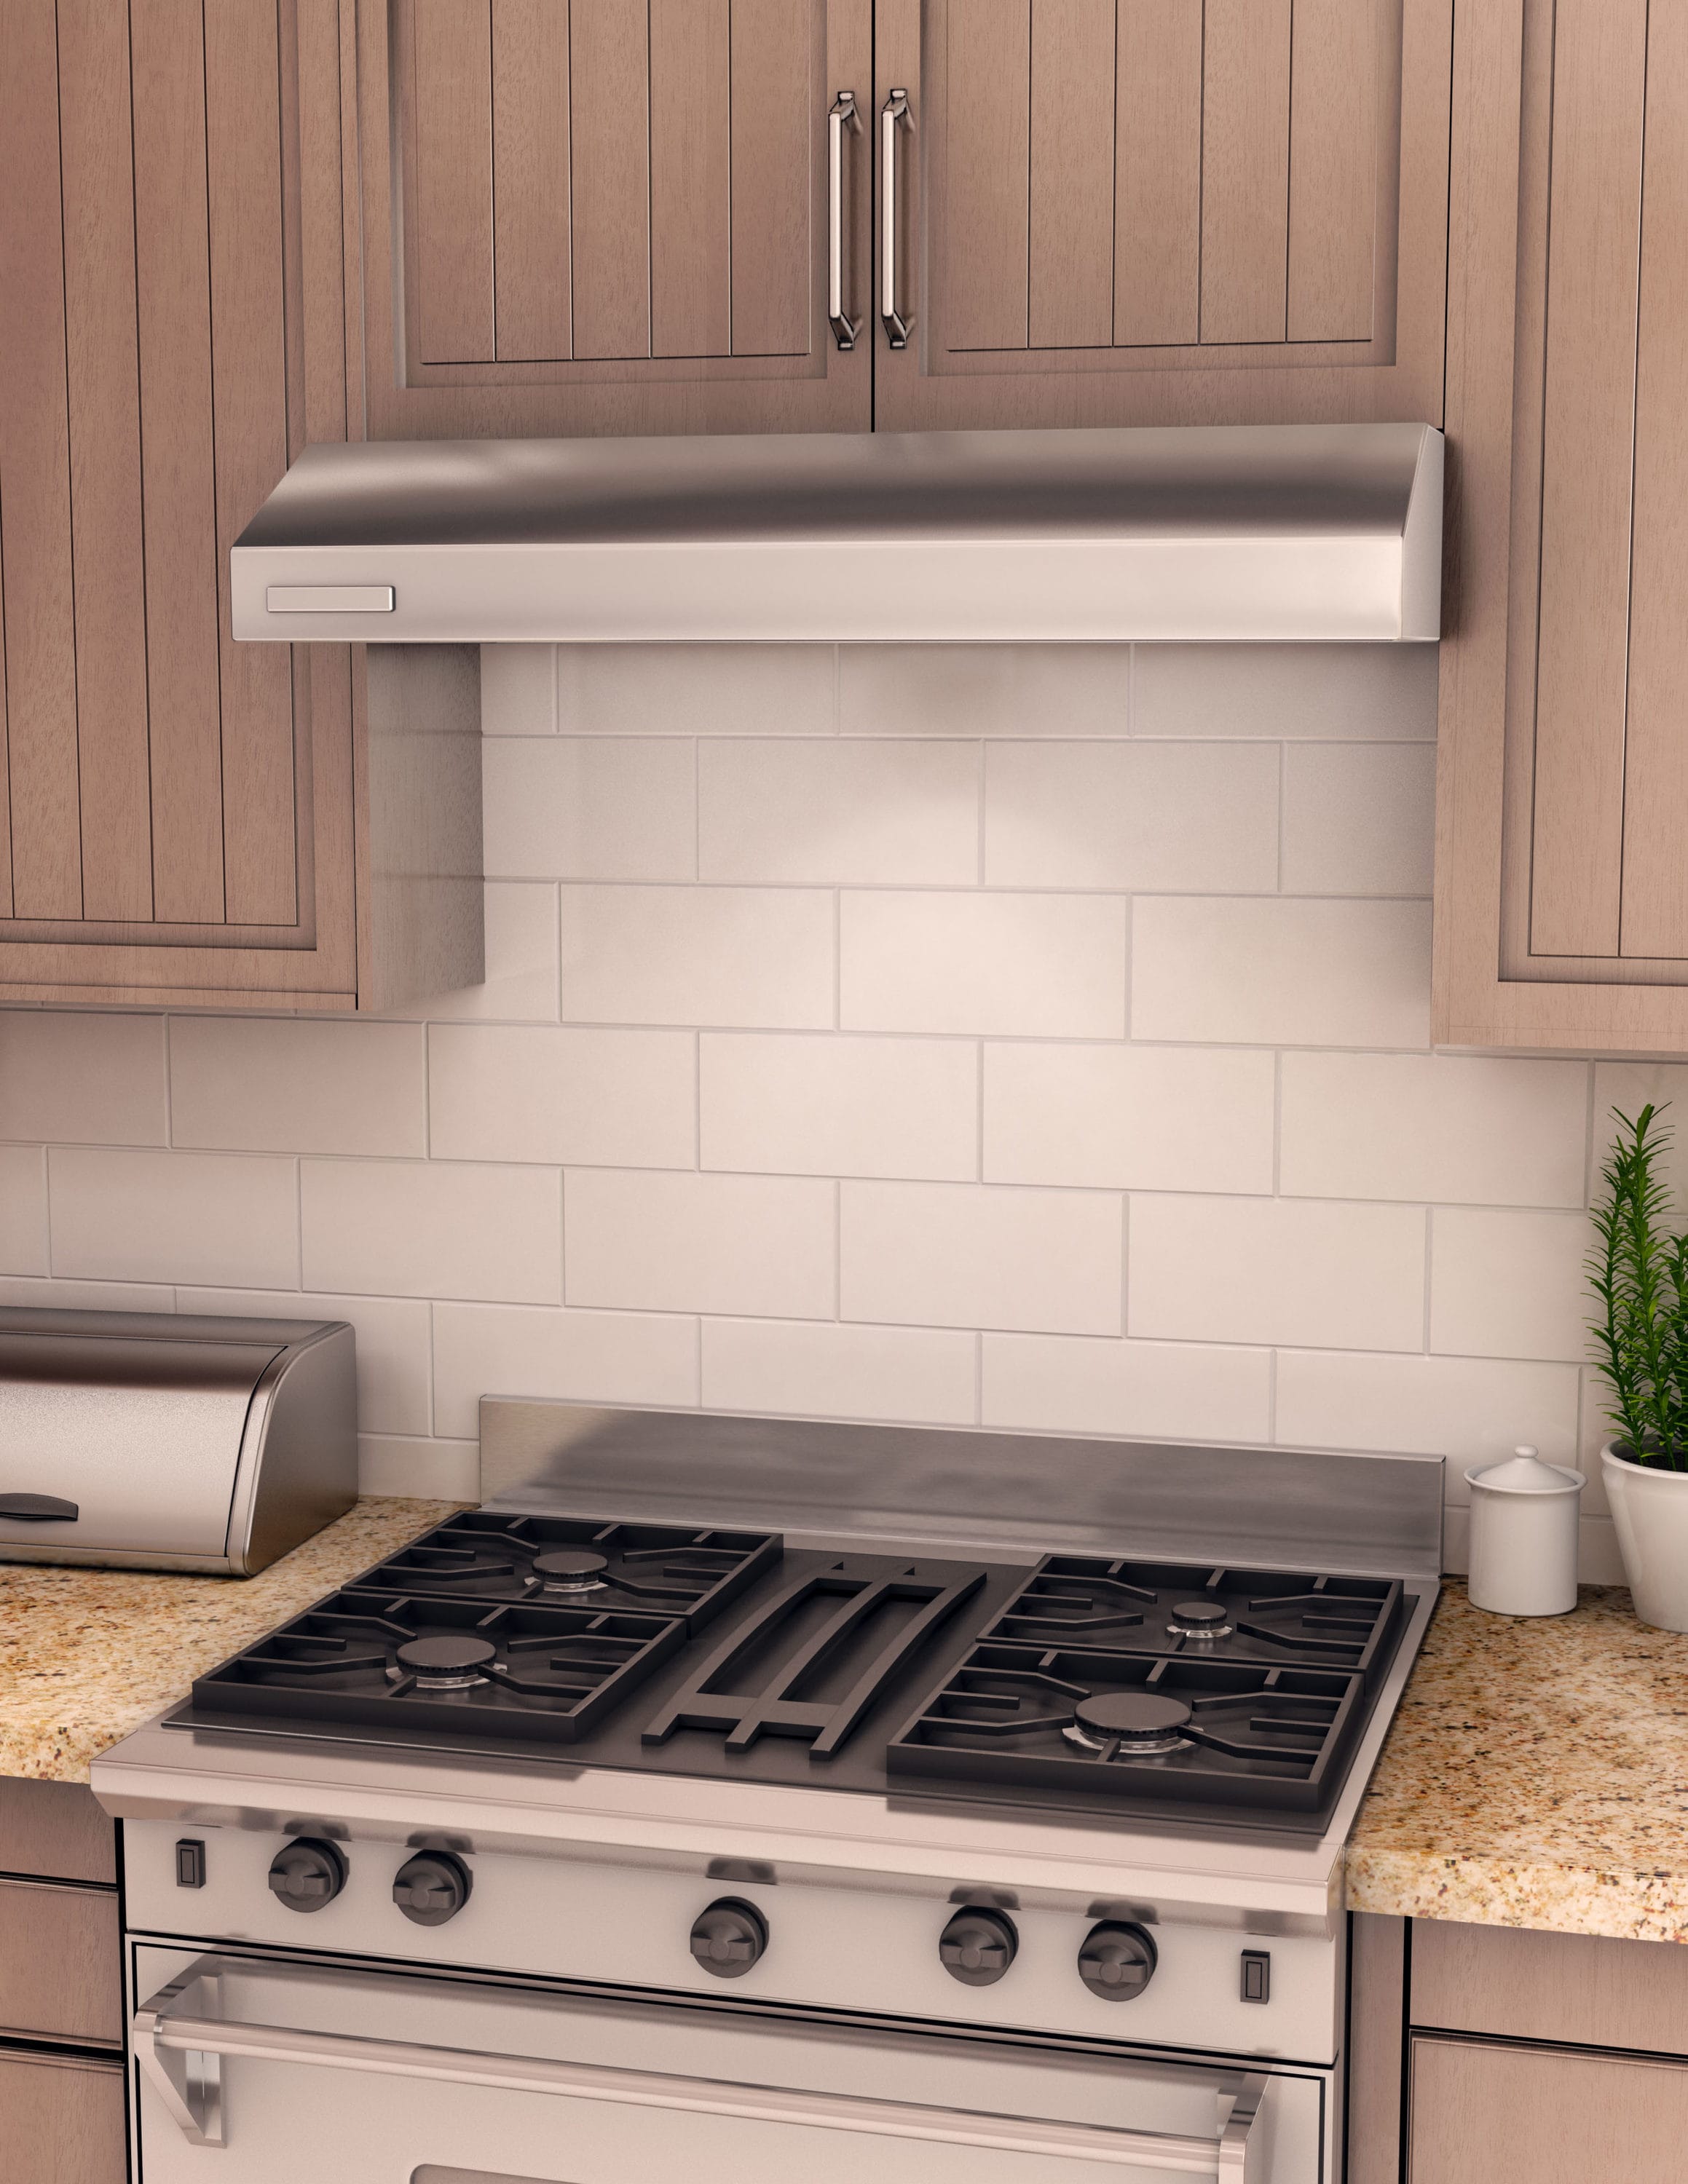 22ga Type 304 #4 Stainless Steel Backsplash Wall Protector Panel  (non-magnetic, brushed finish)